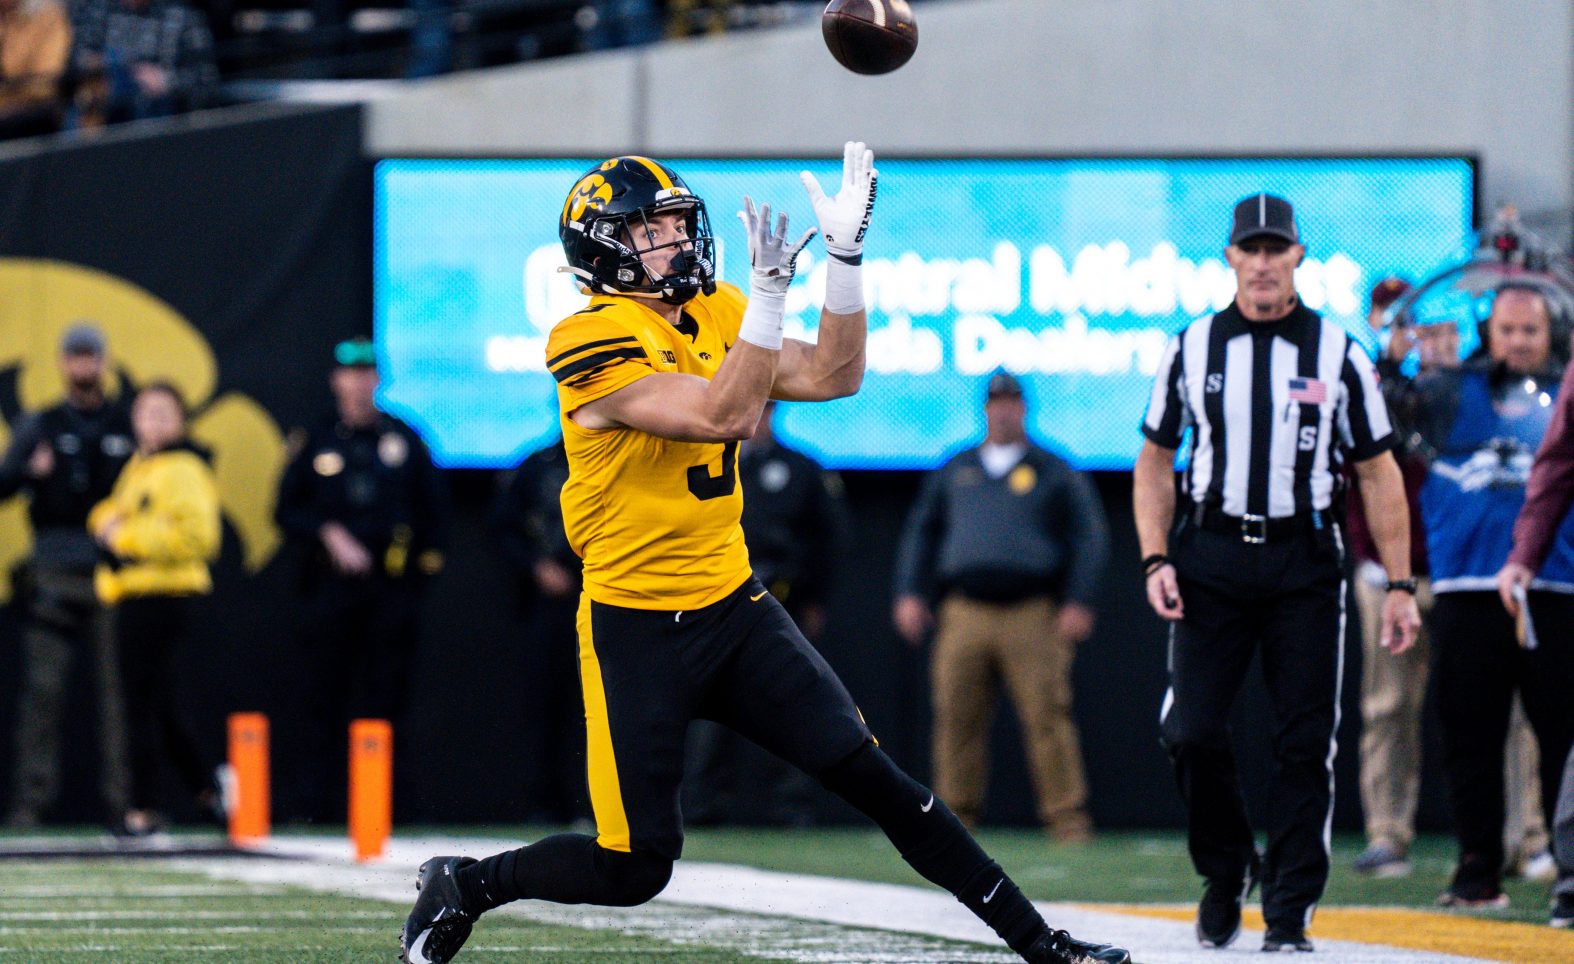 Two Guys Named Chris: “The Call” and Iowa’s epically offensive offense